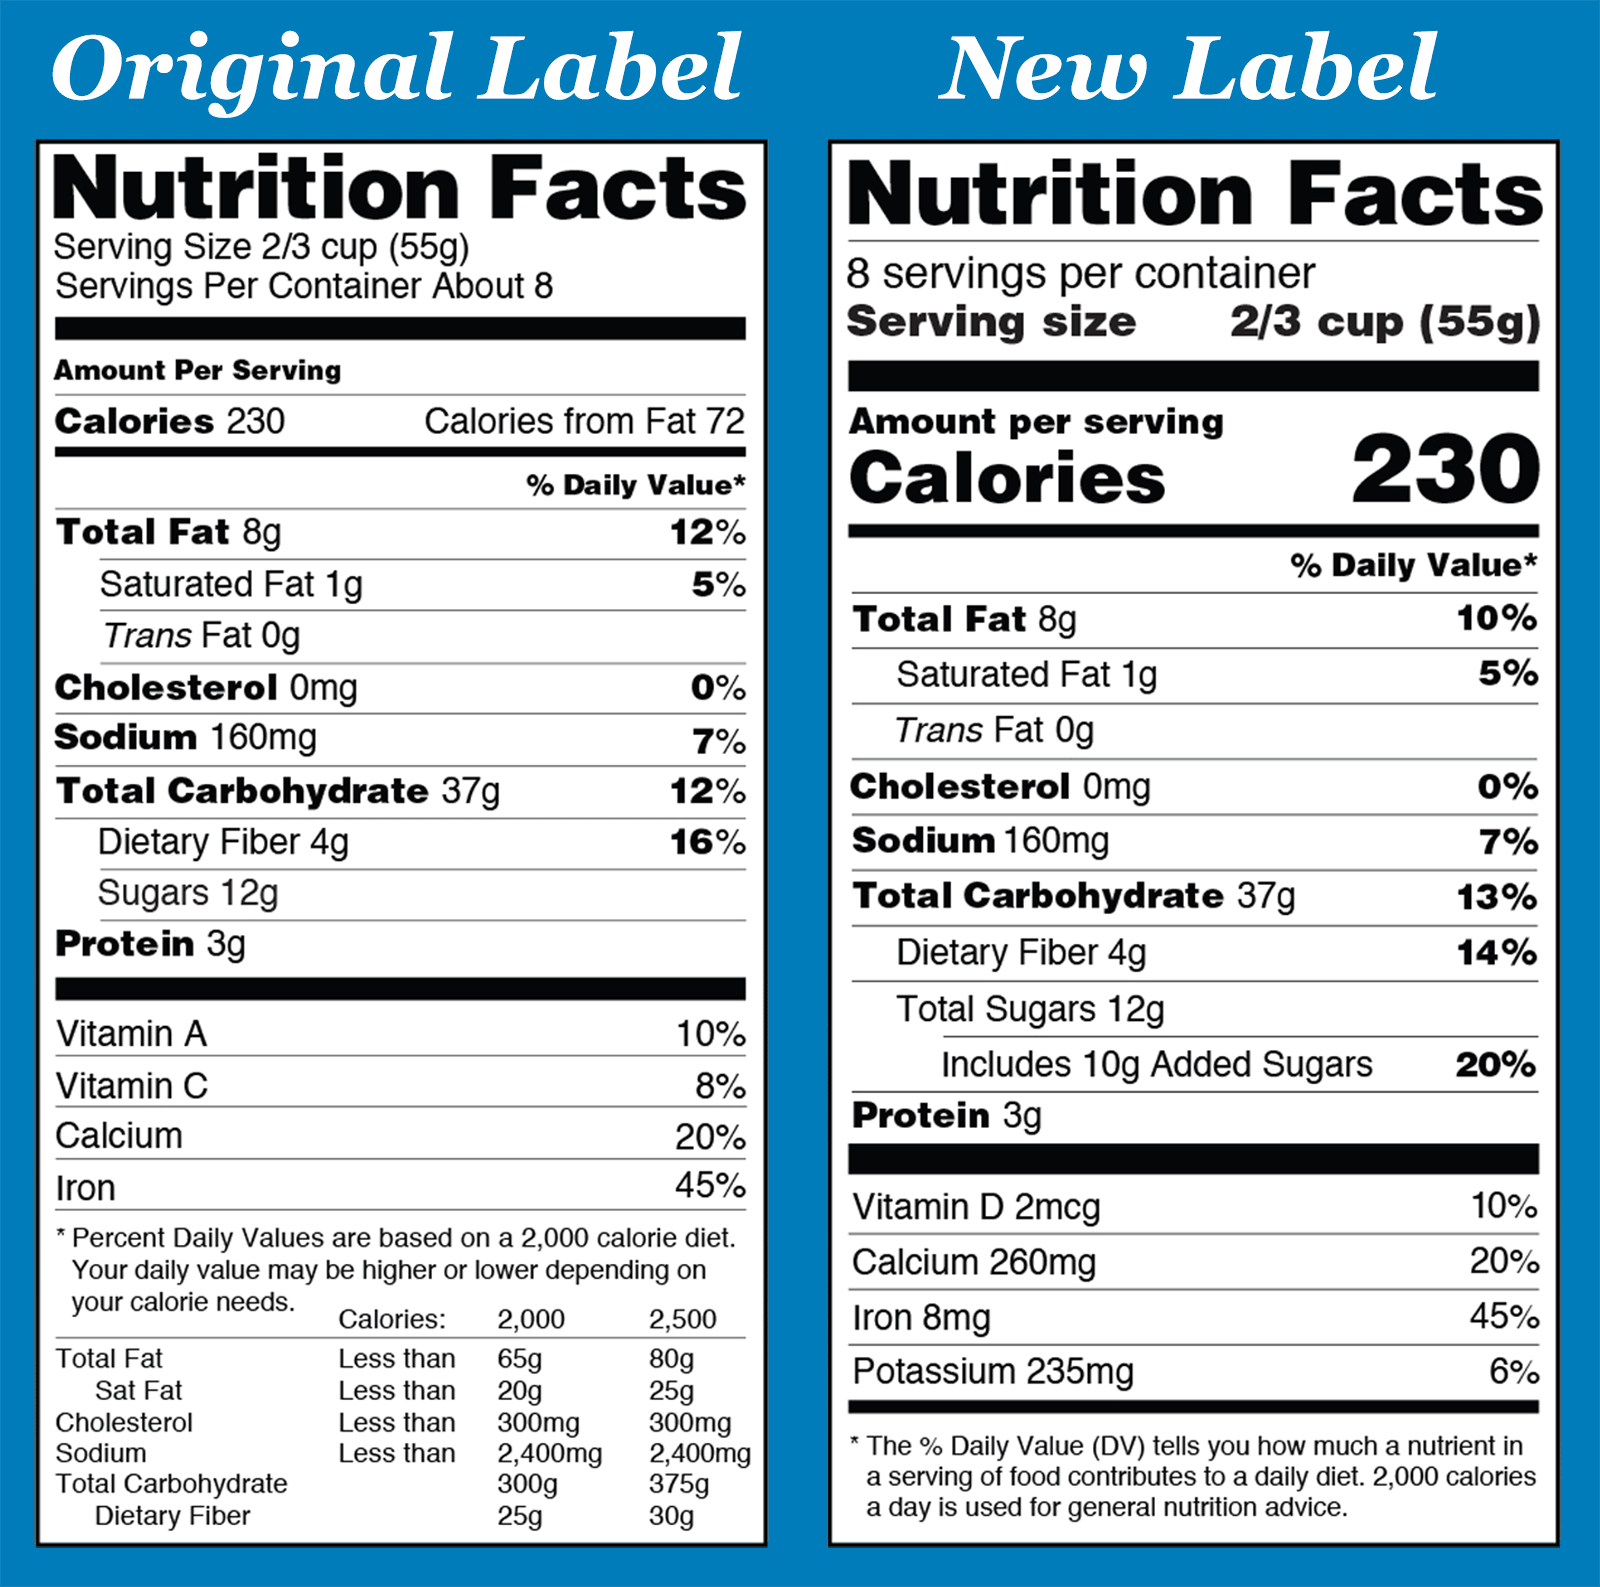 The Nutrition Facts Label: a side-by-side comparison of the original and the new designs.